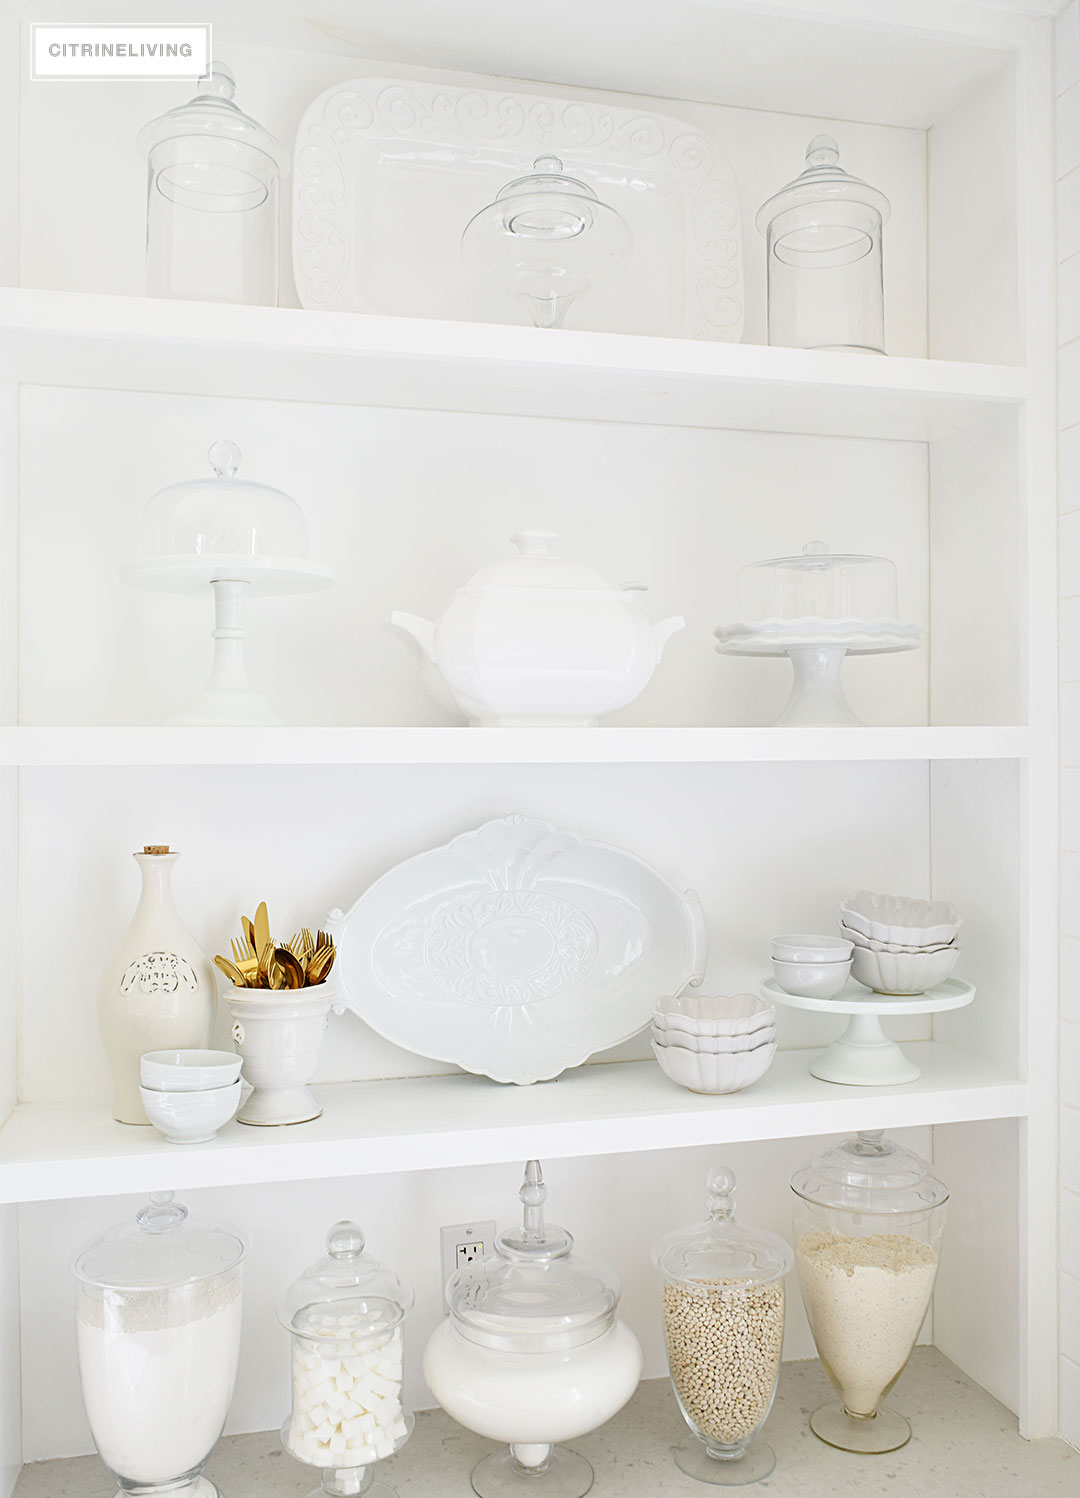 Bring vintage flair to your open kitchen shelving with a mix of white and cream serving pieces and dishware for a fresh, layered look.